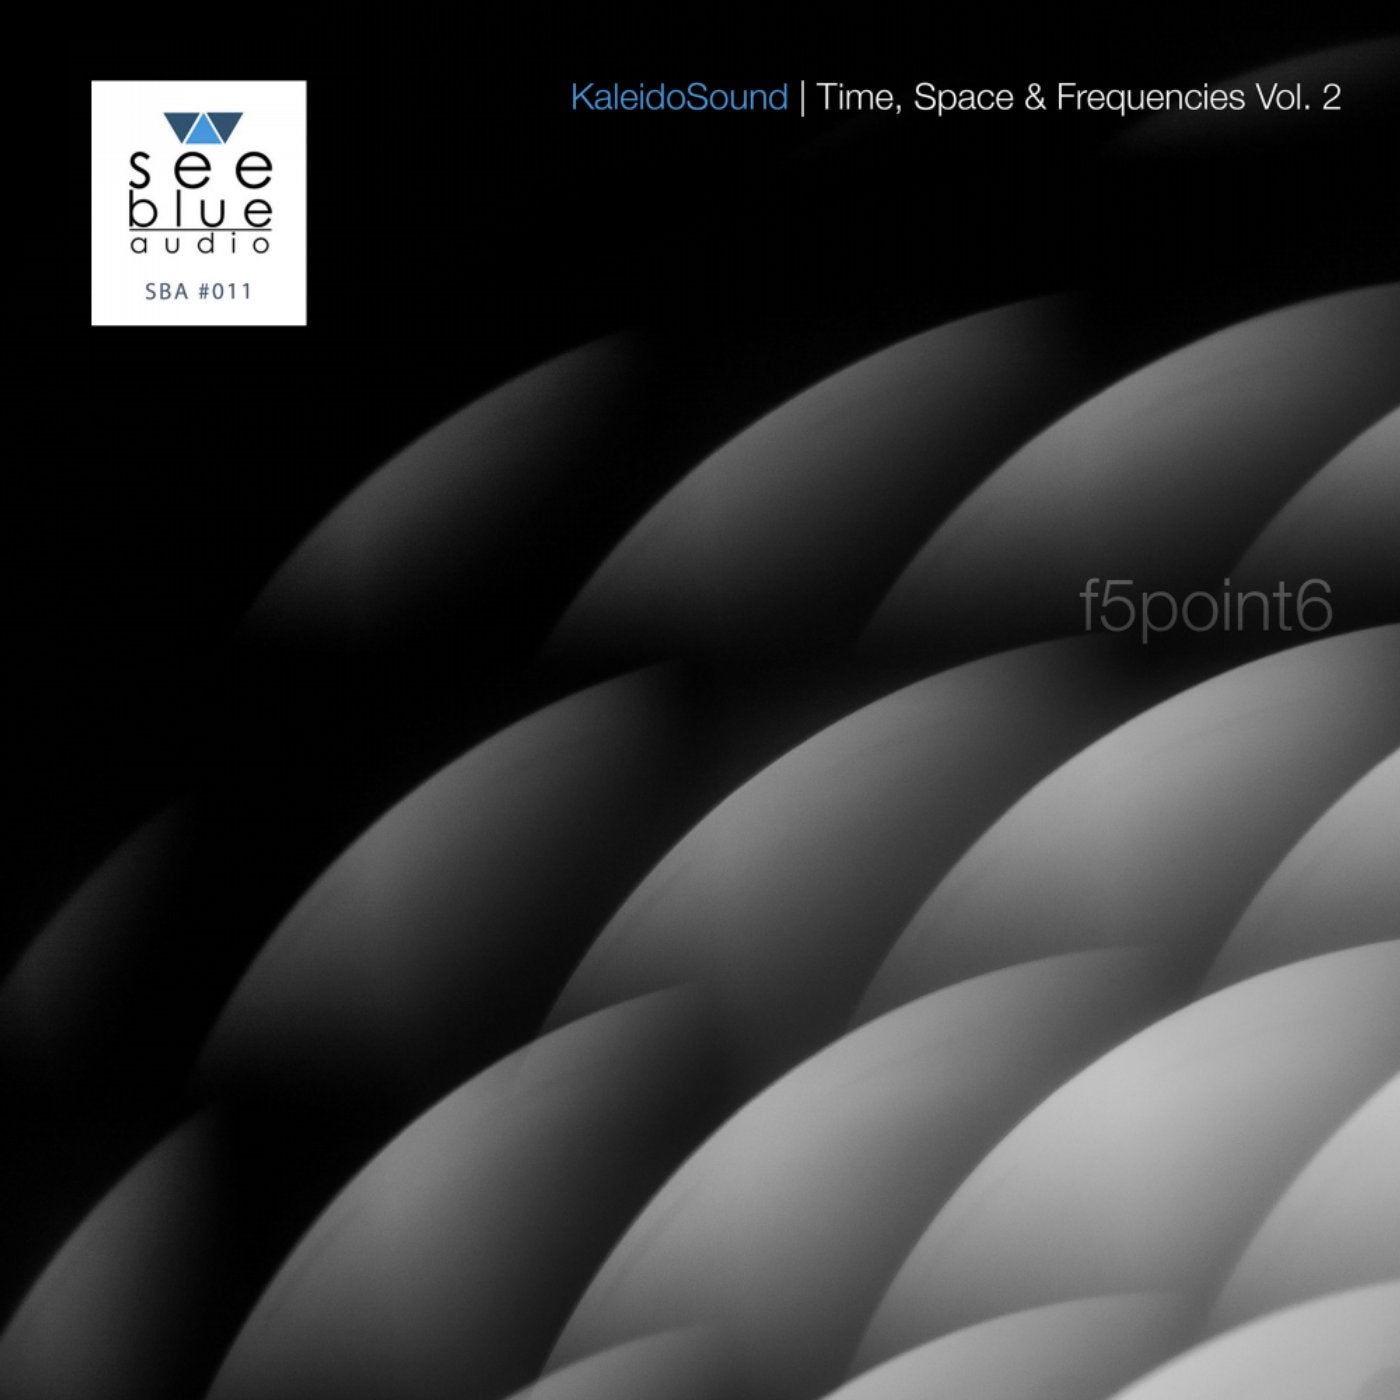 KaleidoSound: Time, Space & Frequencies Vol. 2